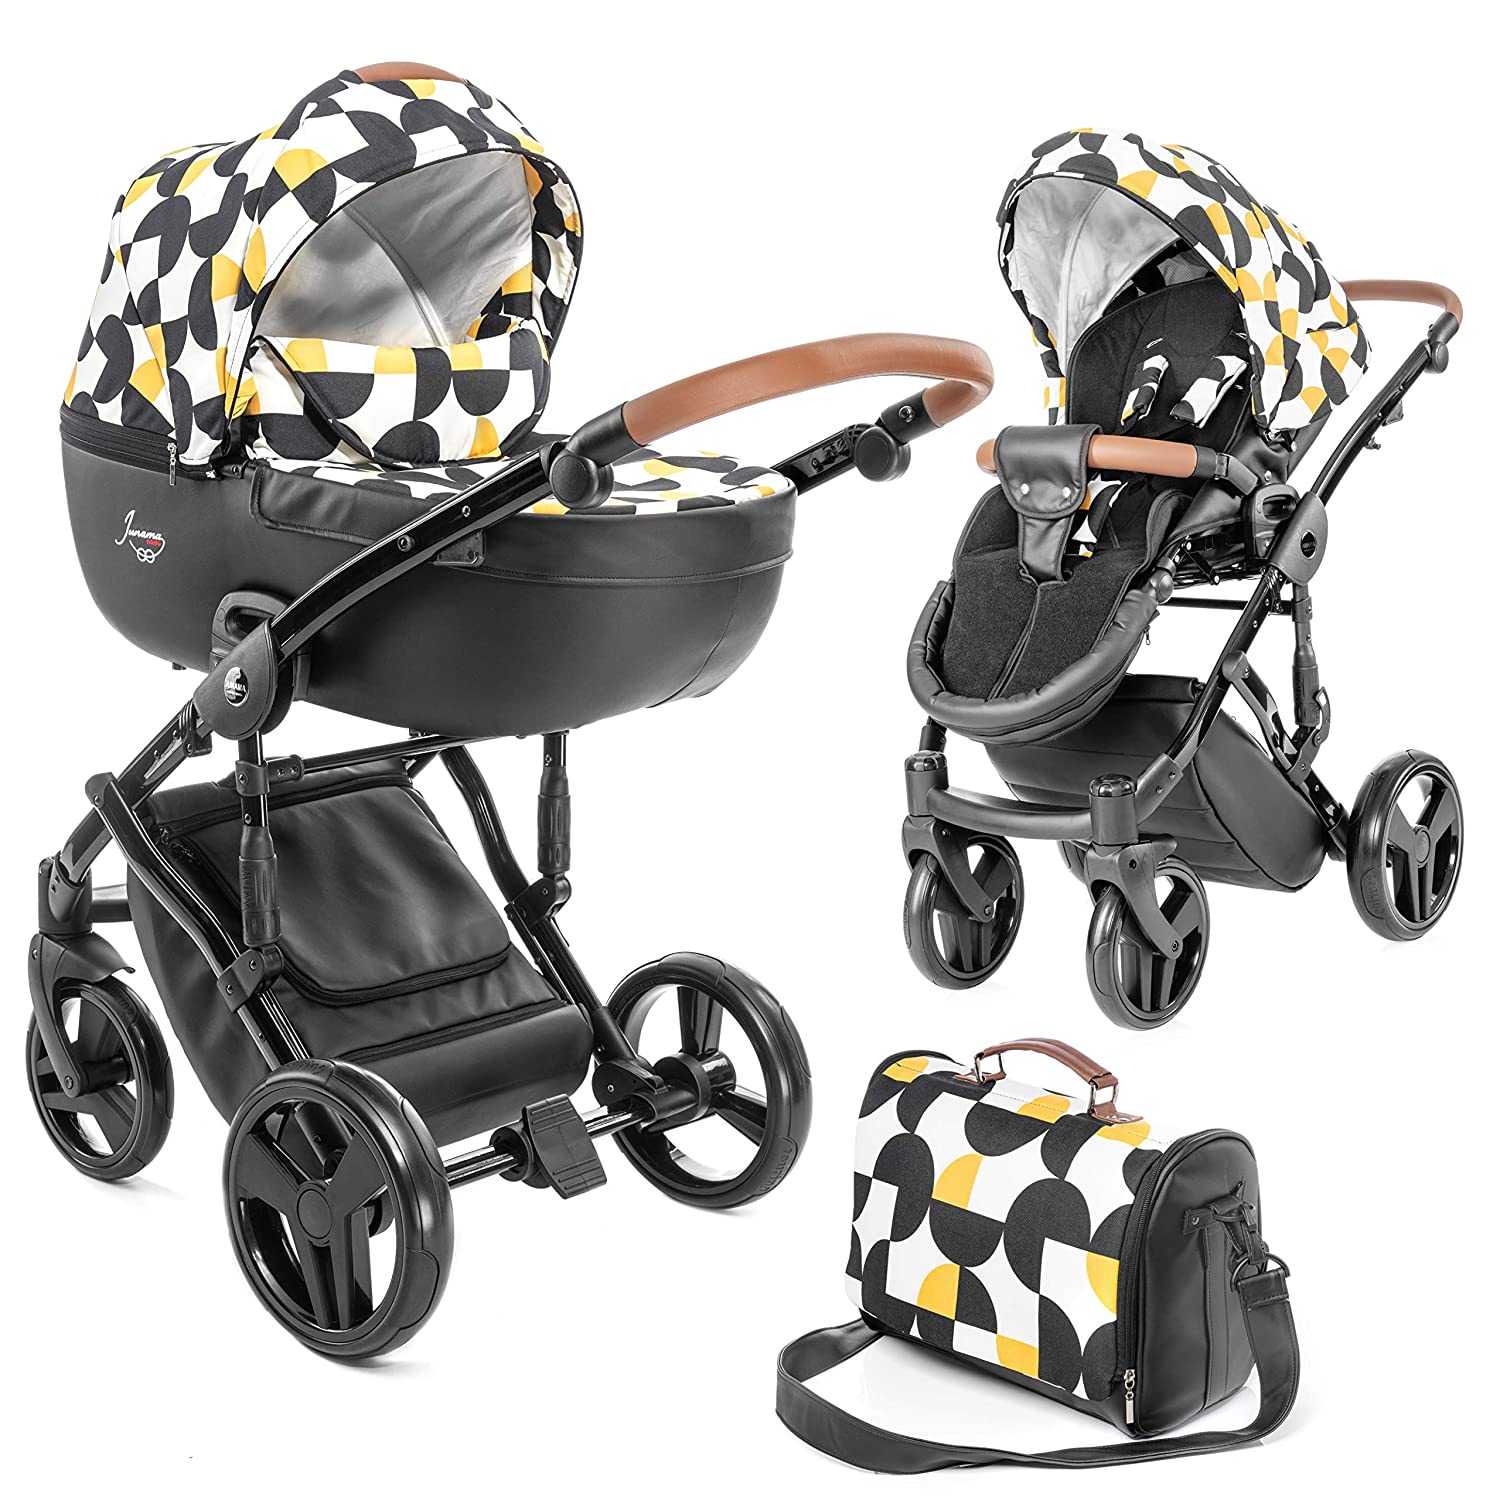 Junama Madena 2-in-1 Combination Pram Set with Baby Bath and Pushchair Folding Pushchair with Changing Bag and Accessories - Packman Black / Yellow